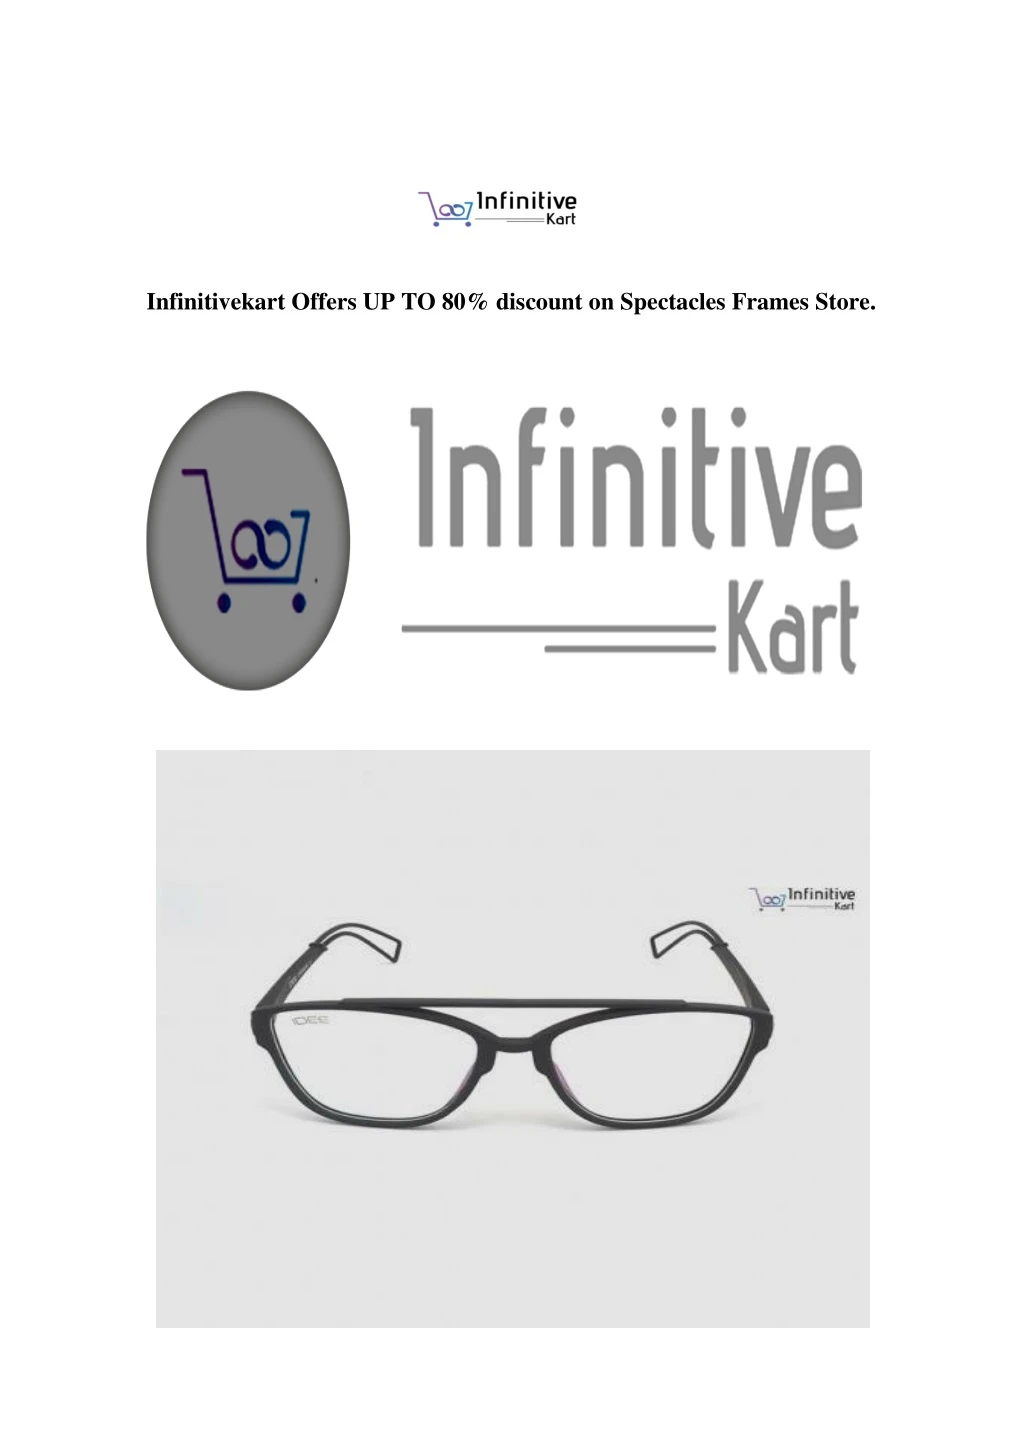 infinitivekart offers up to 80 discount